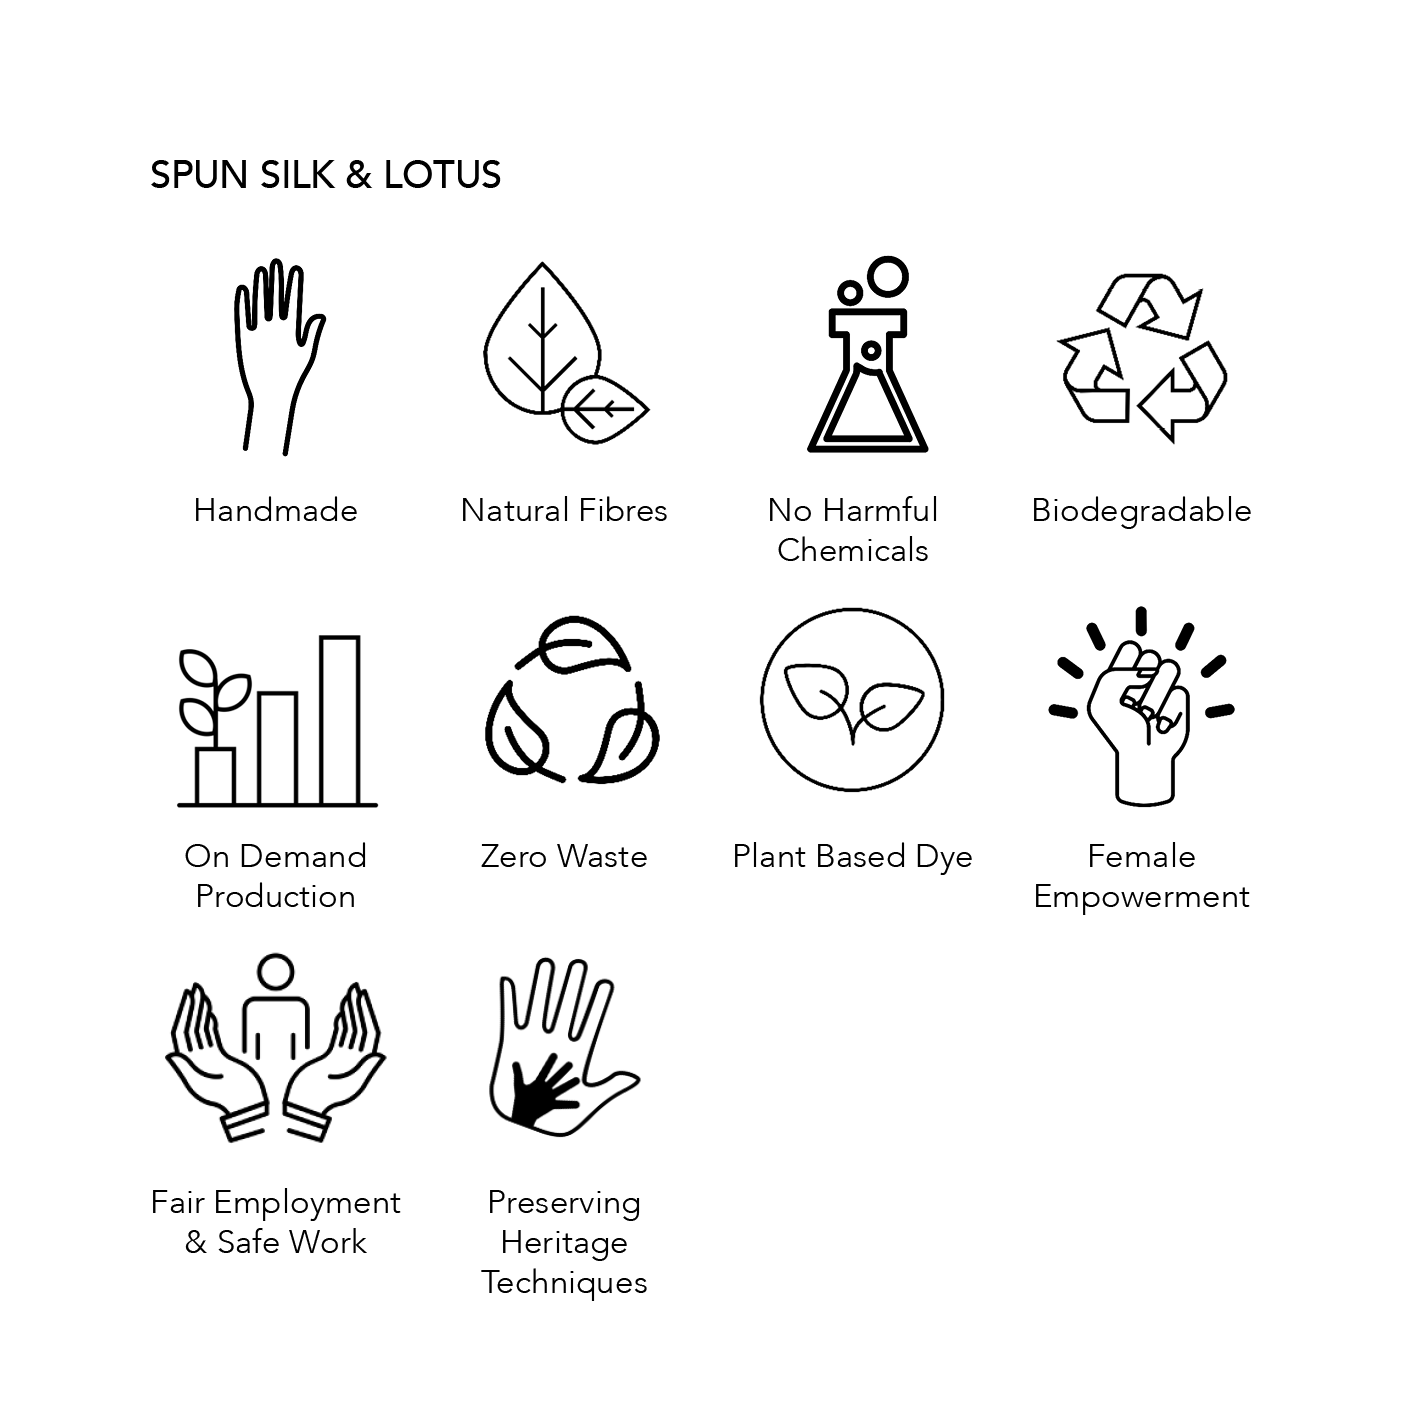 Spun Silk & Lotus Fabric Sustainability Credentials; handmade, natural fibres, no harmful chemicals used, biodegradable, on demand production, zero waste, plant based dye, female empowerment, fair employment and safe work and preserving heritage techniques.